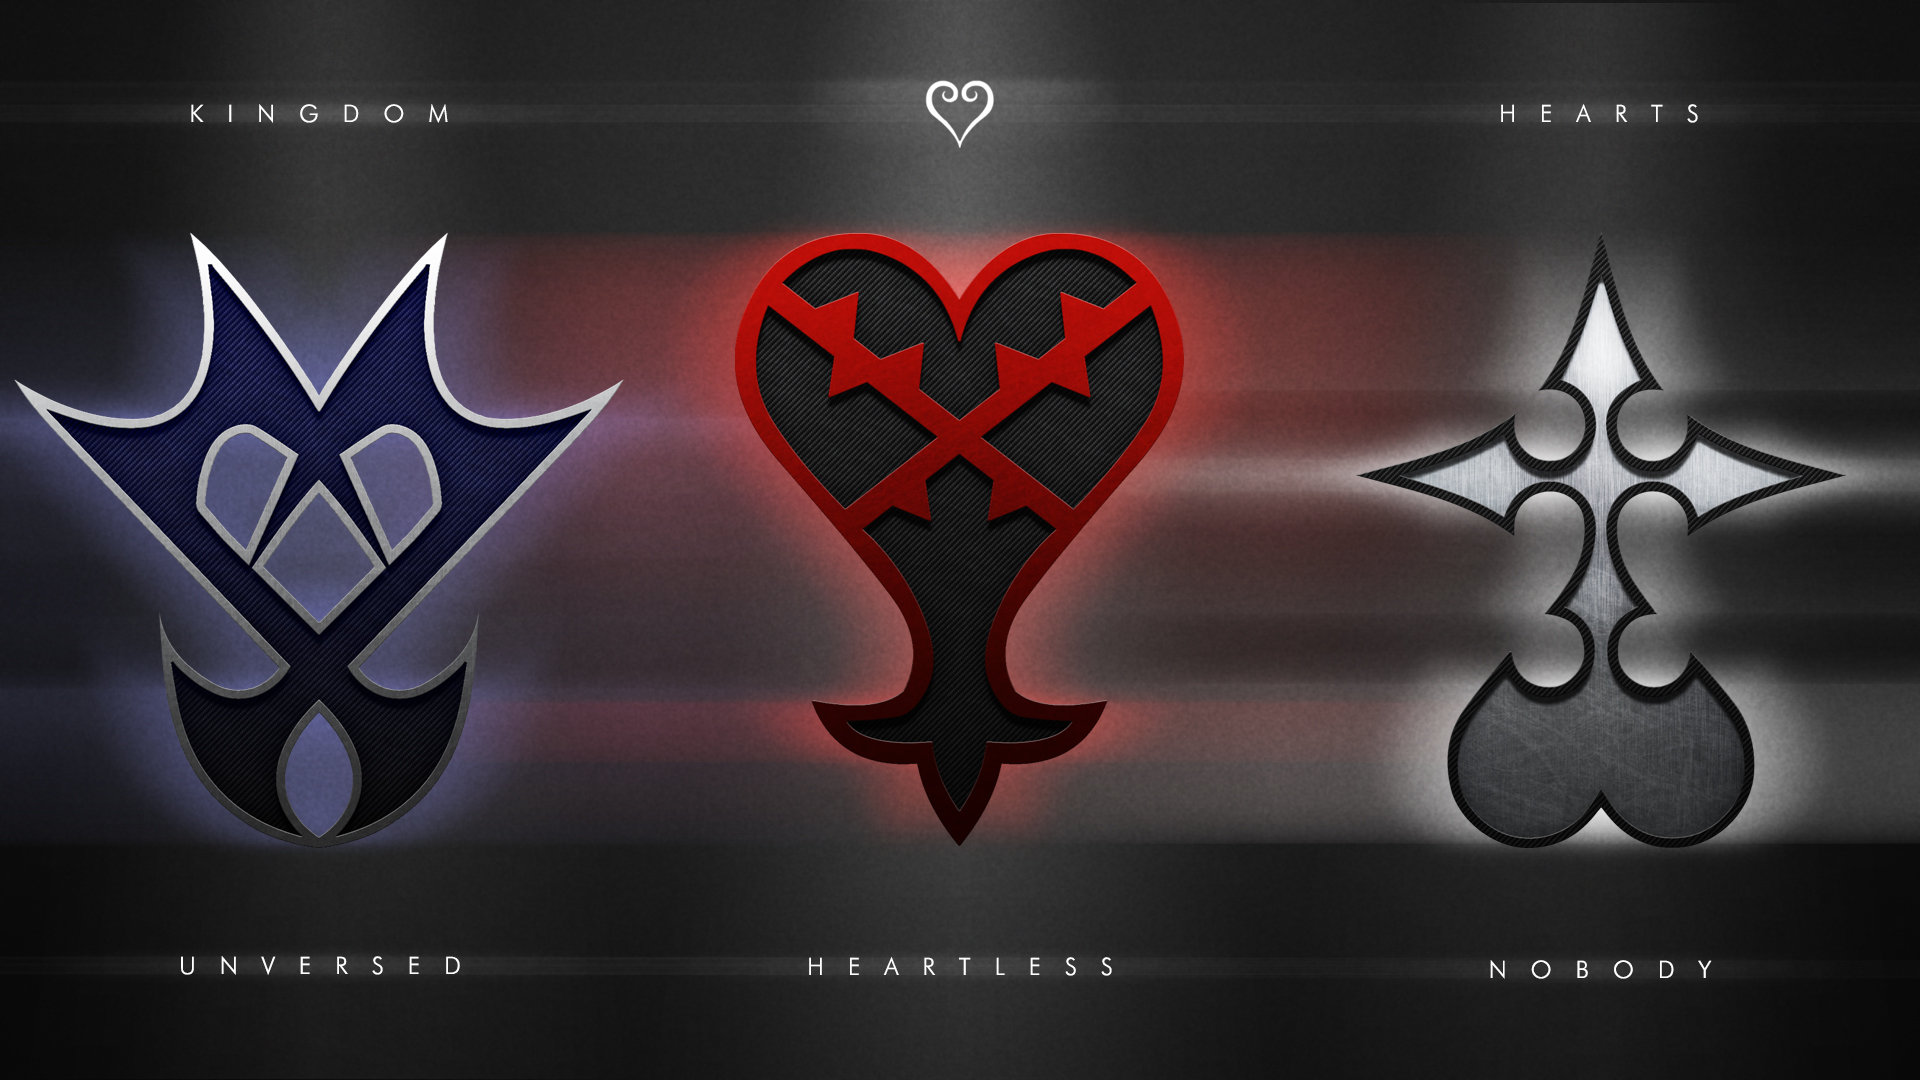 Kingdom Hearts Emblems Wallpaper by Pencil X Paper on